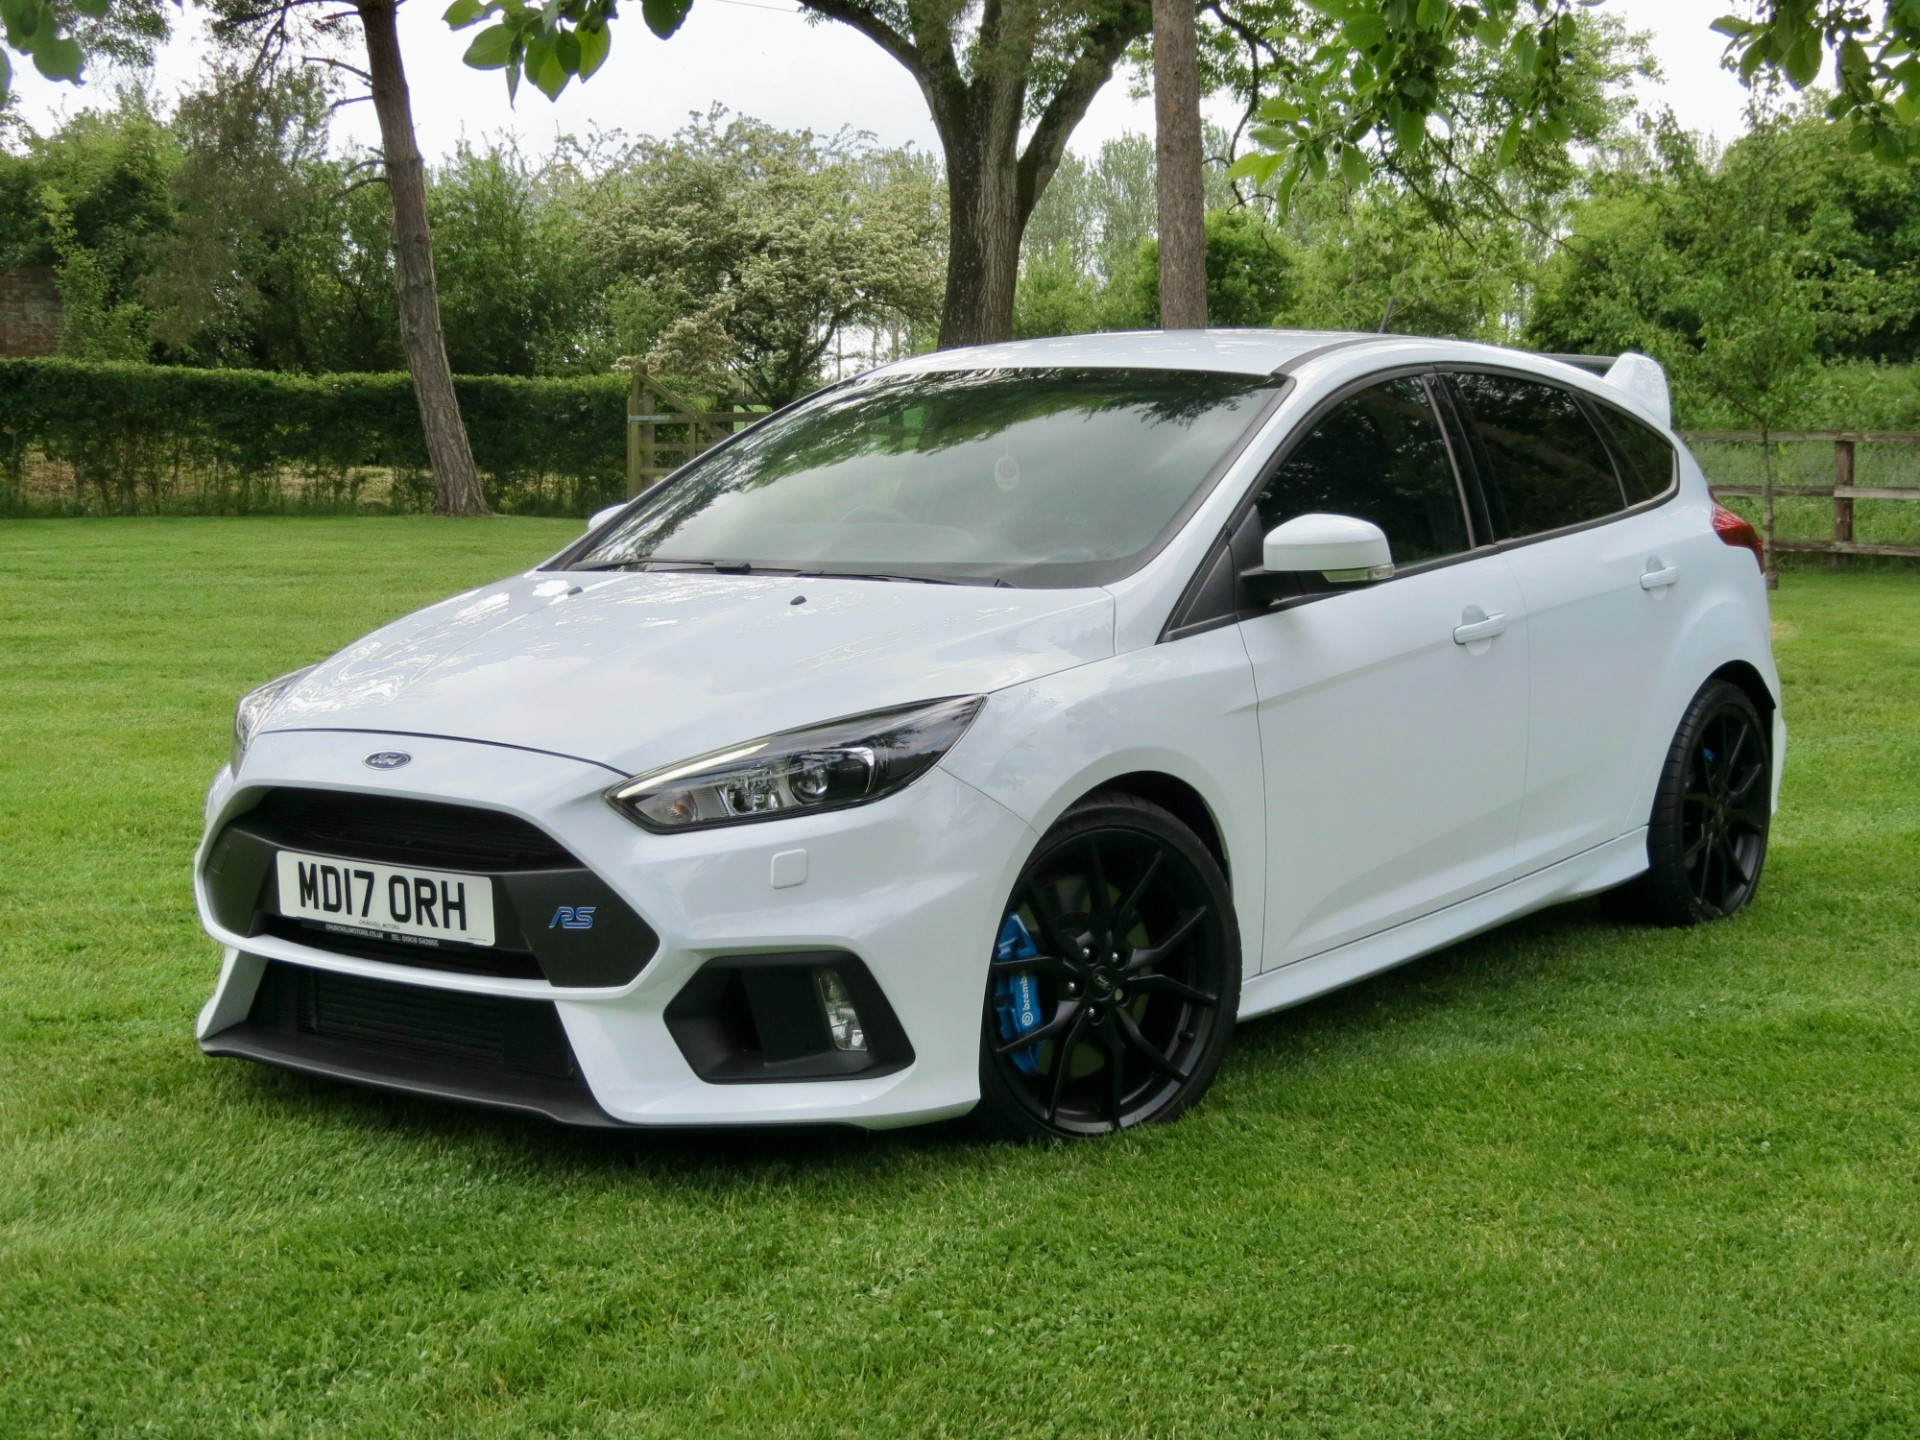 Used Ford Focus for sale in Towcester, Northamptonshire